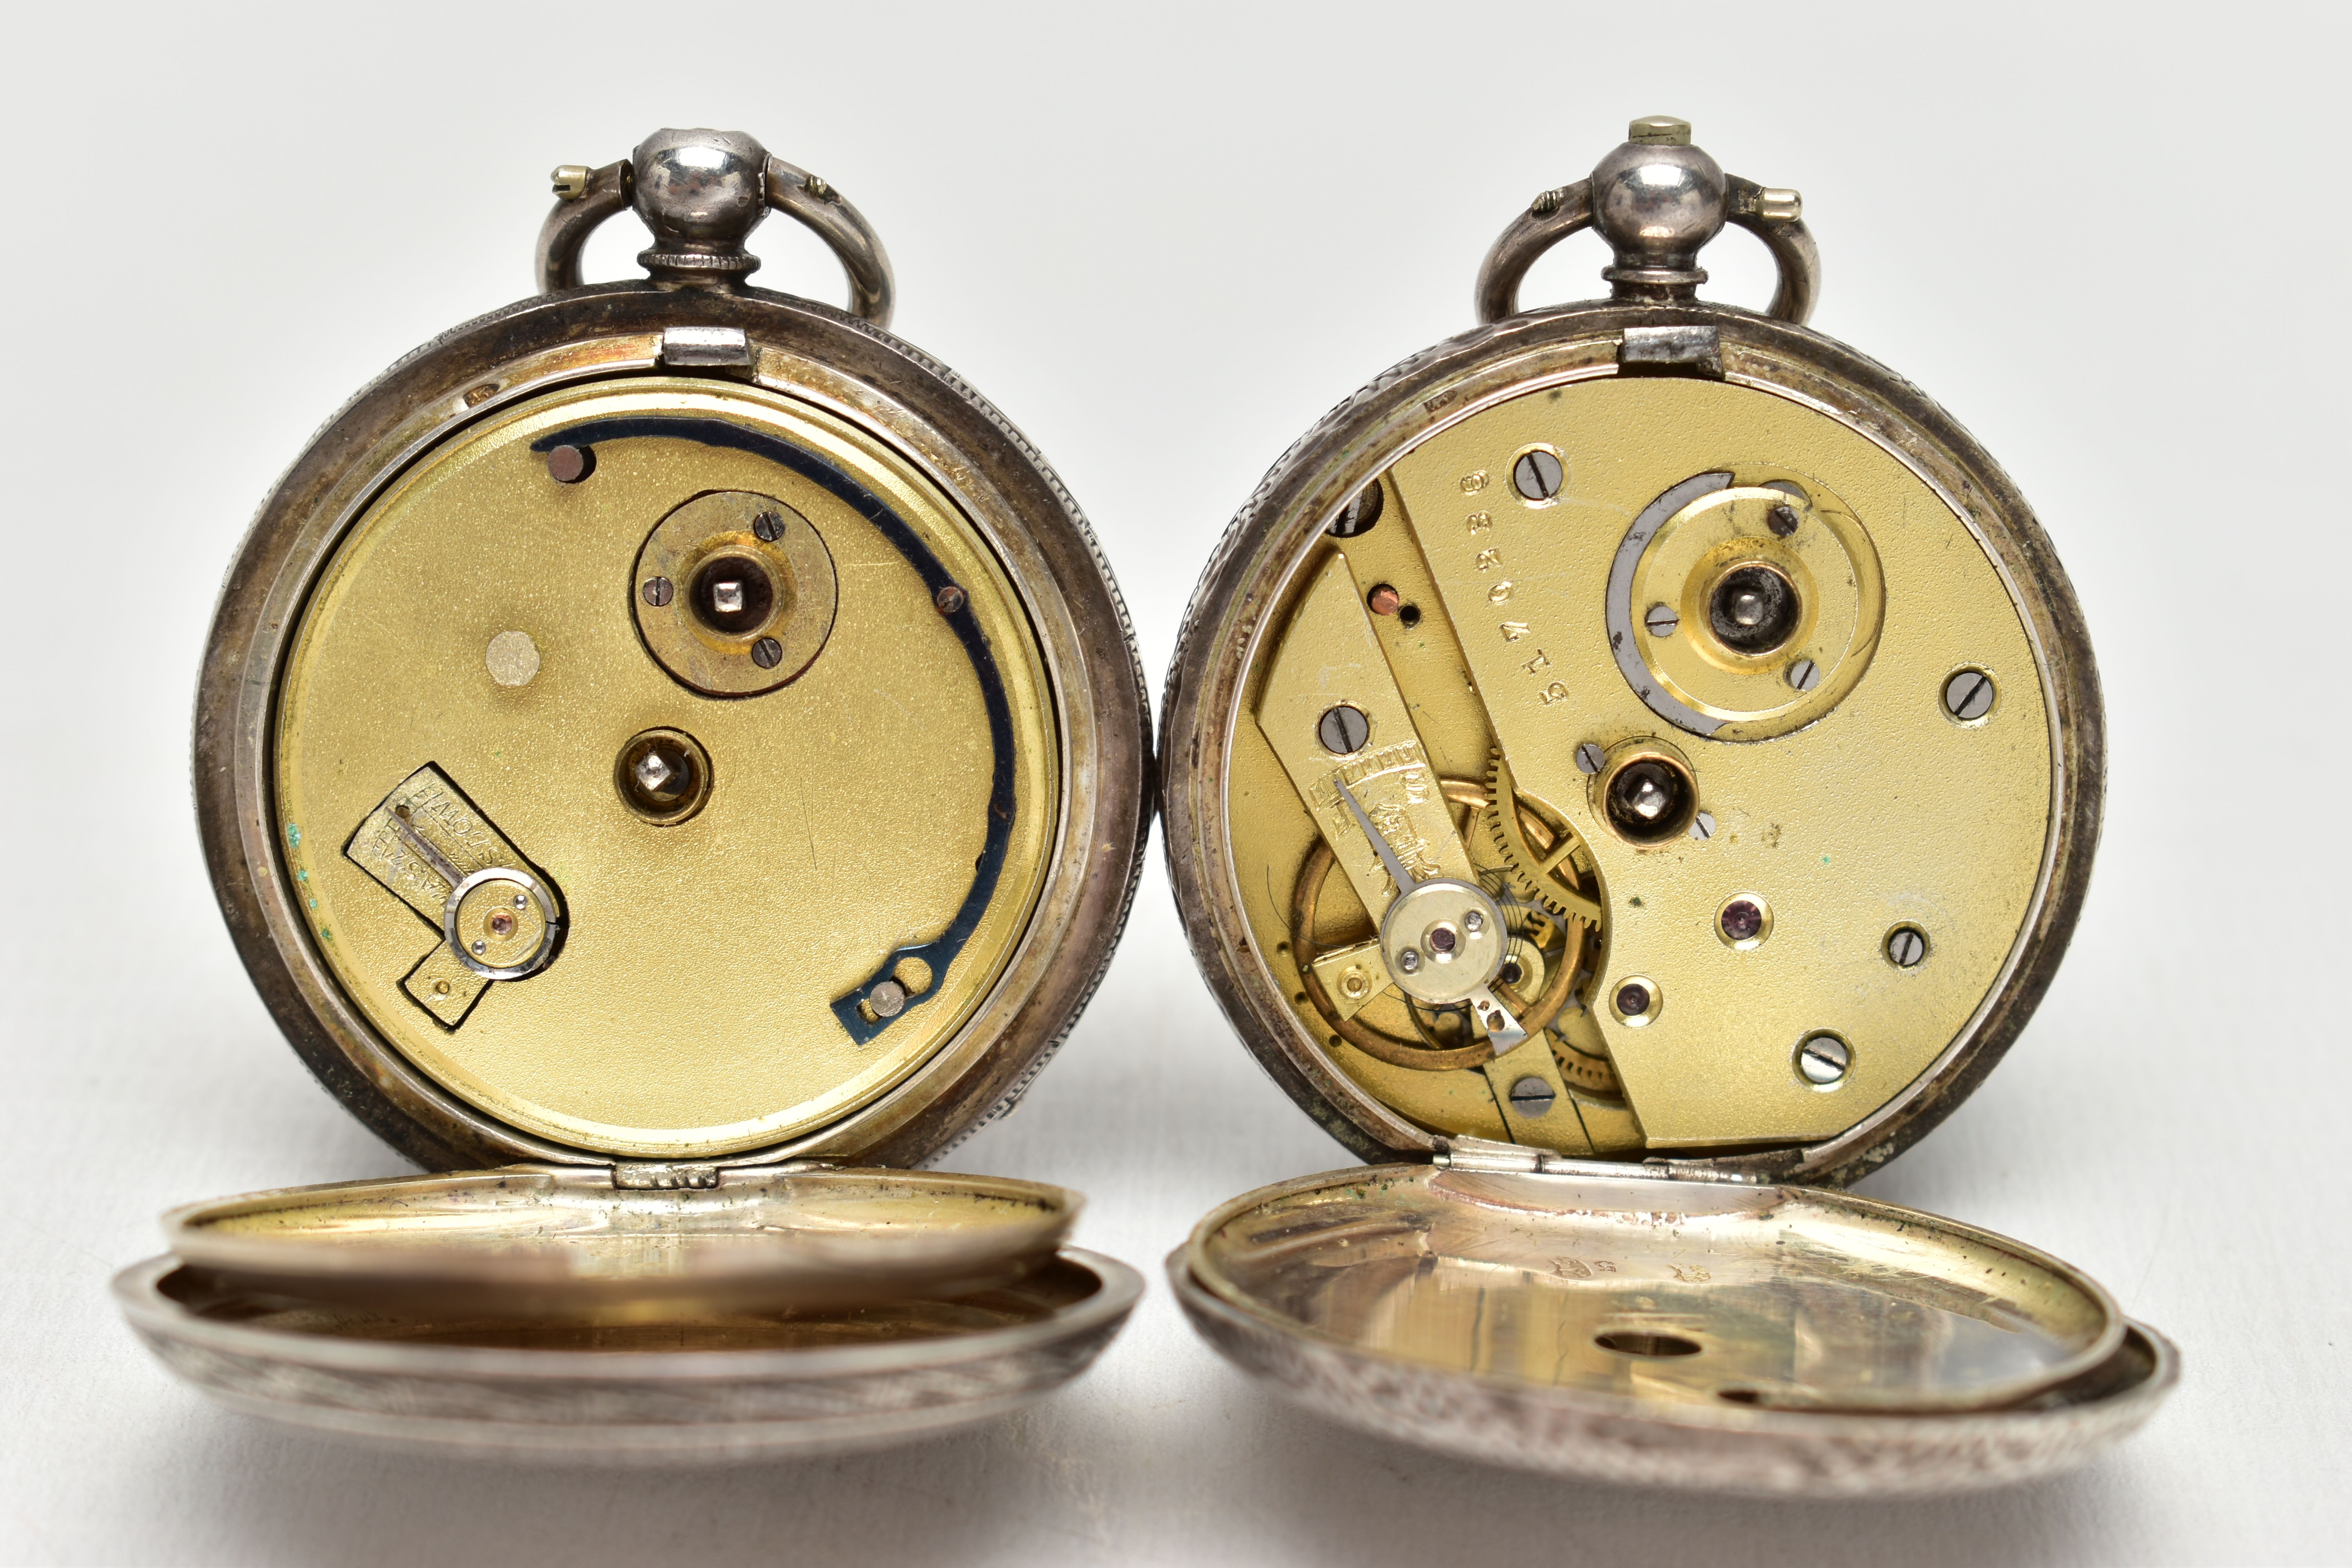 TWO SILVER LADIES POCKET WATCHES, the first a white circular dial with Roman numeral hourly markers, - Image 5 of 5